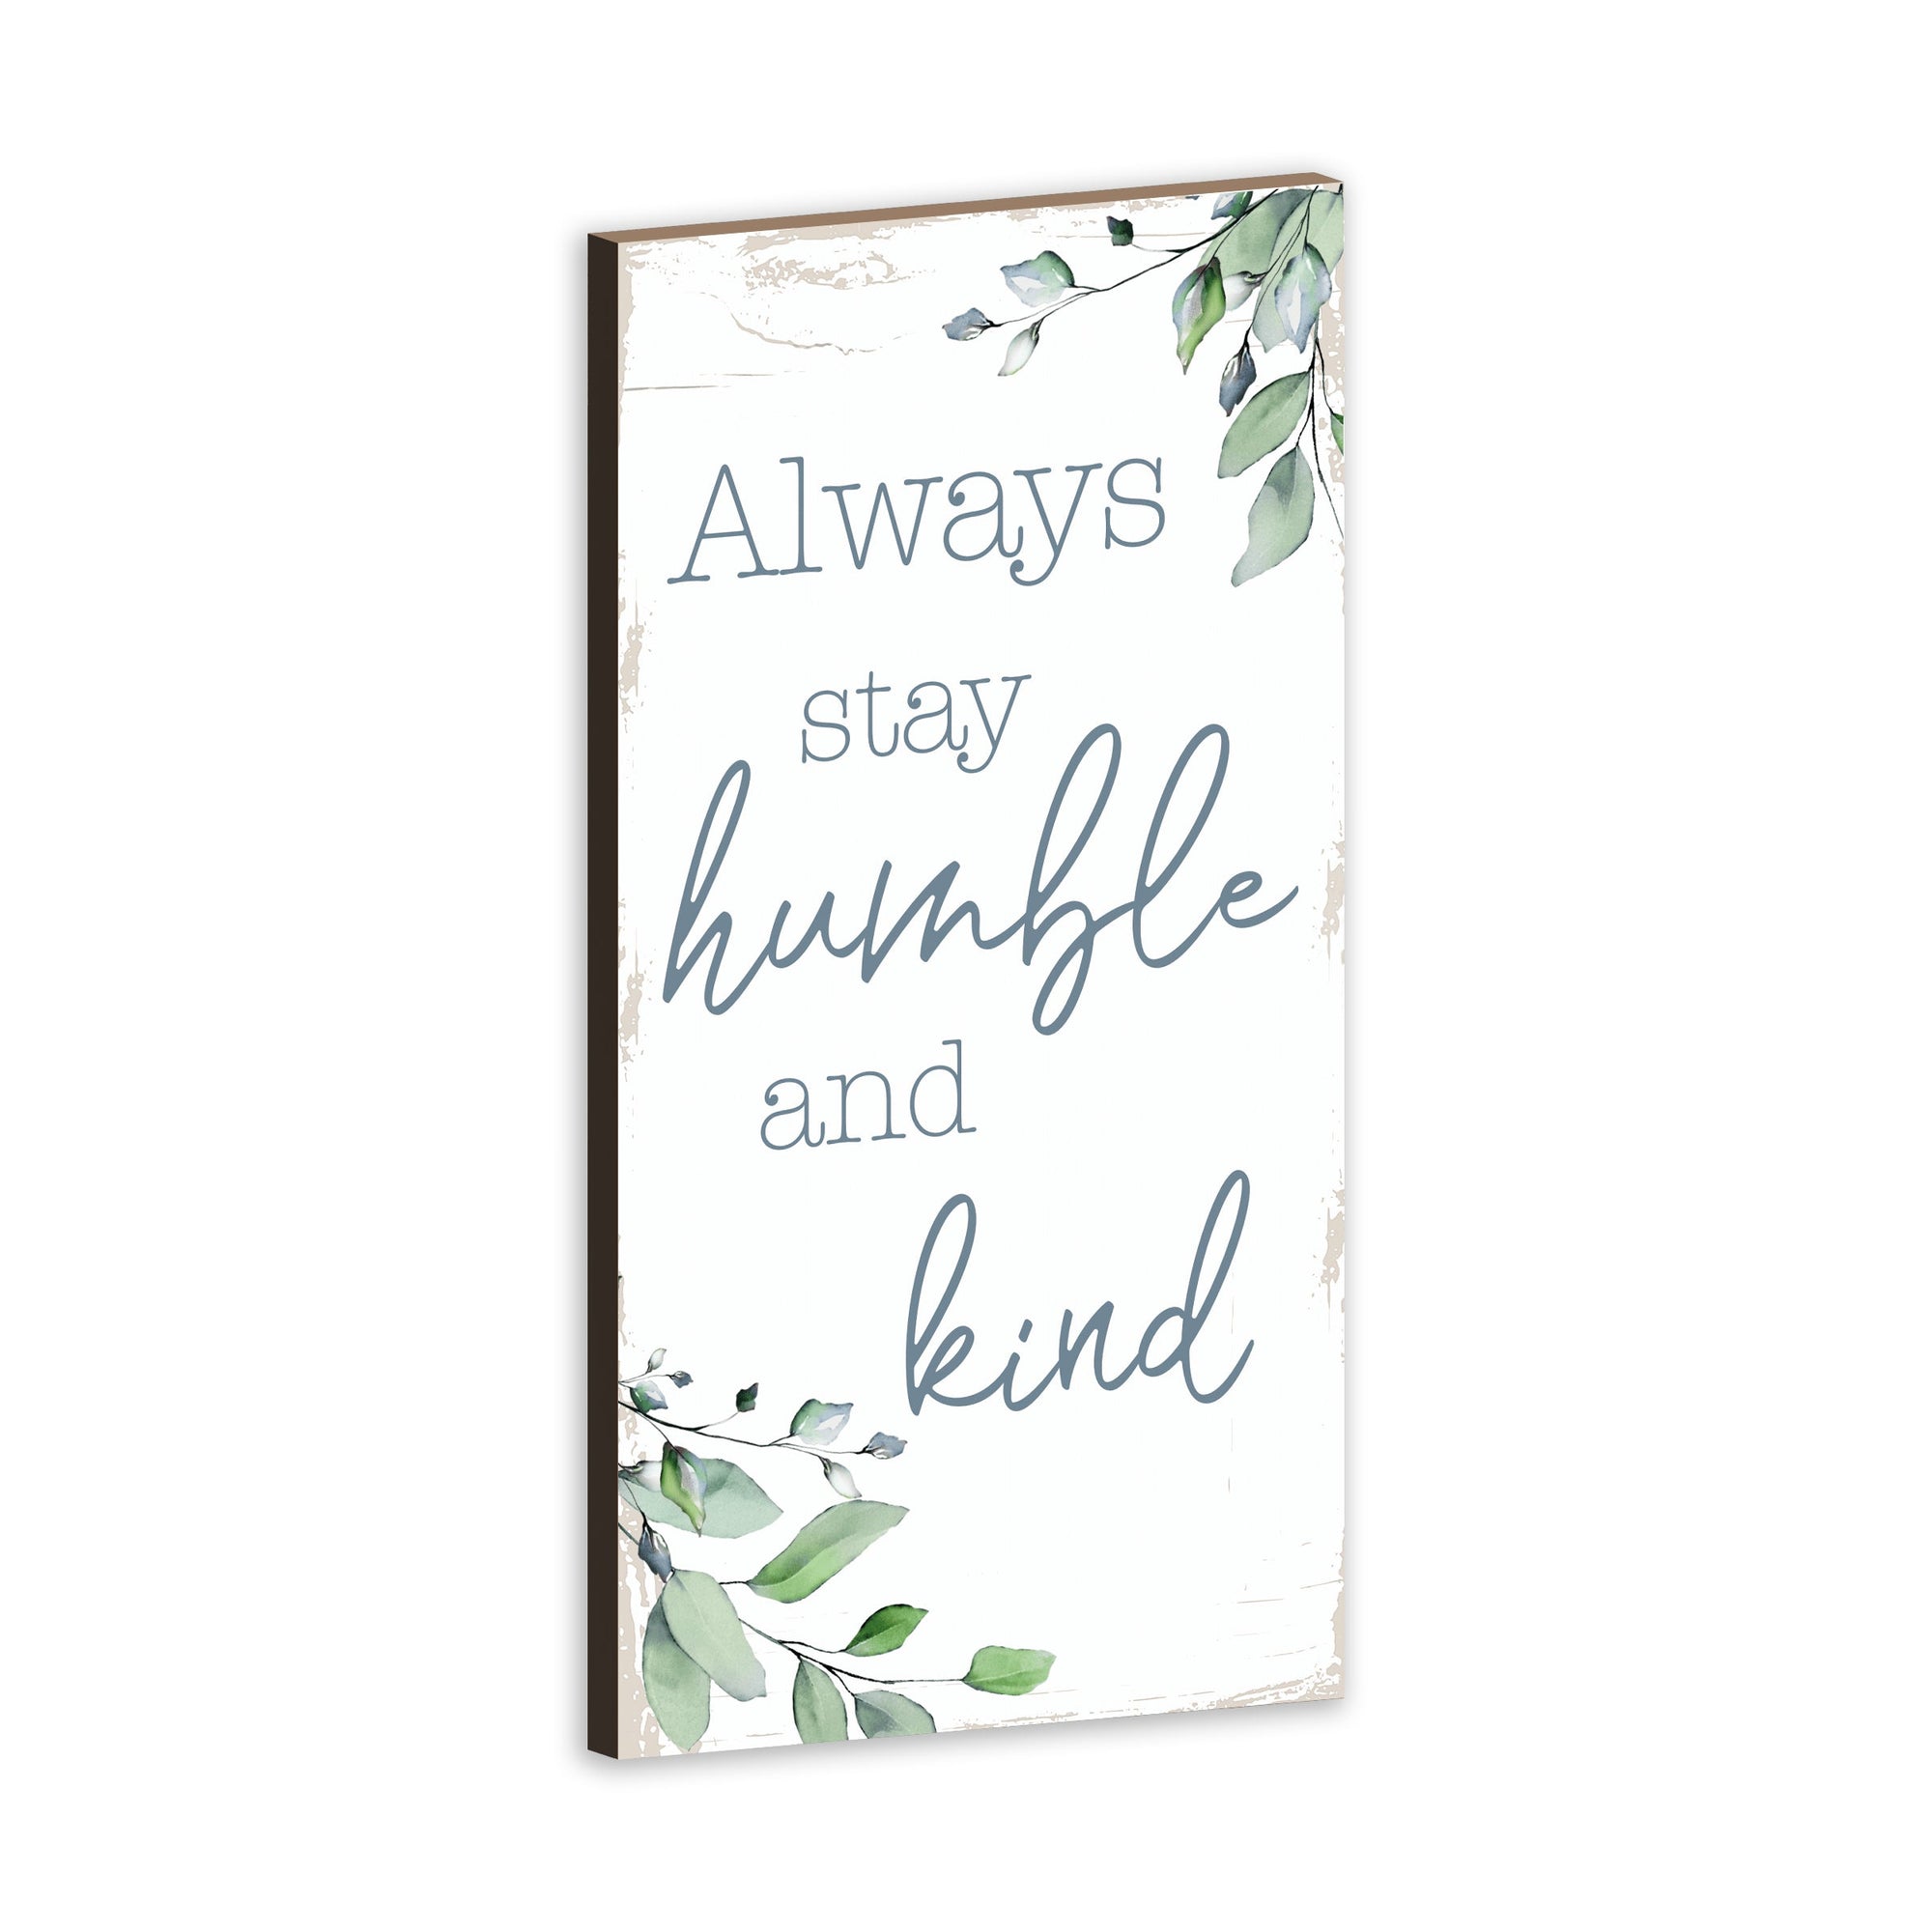 Wooden Family Wall Plaque: A Beautiful Wall Decor Gift for Loved Ones